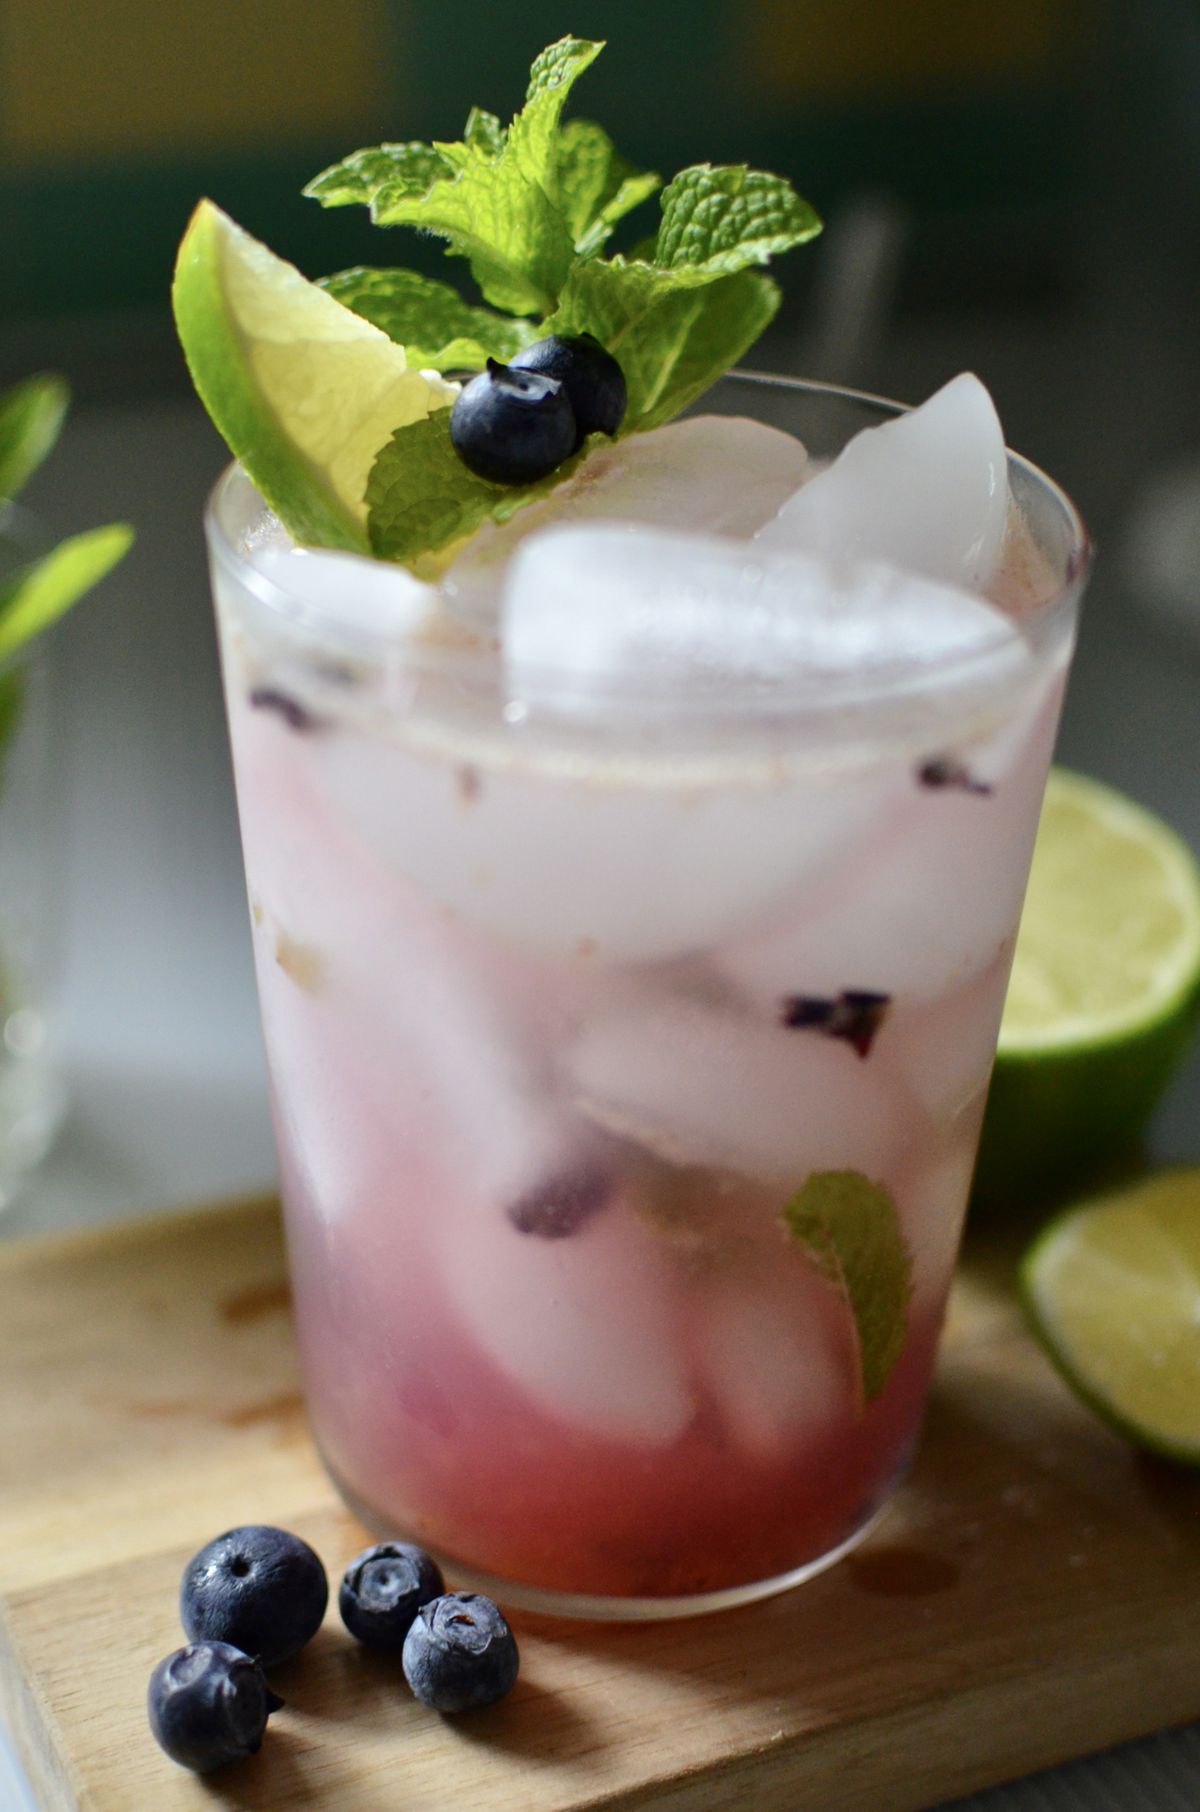 This blueberry mojito is a twist on a traditional Cuban cocktail that traces its roots back to the 1500s.  (Ricky Webster/For The Spokesman-Review)